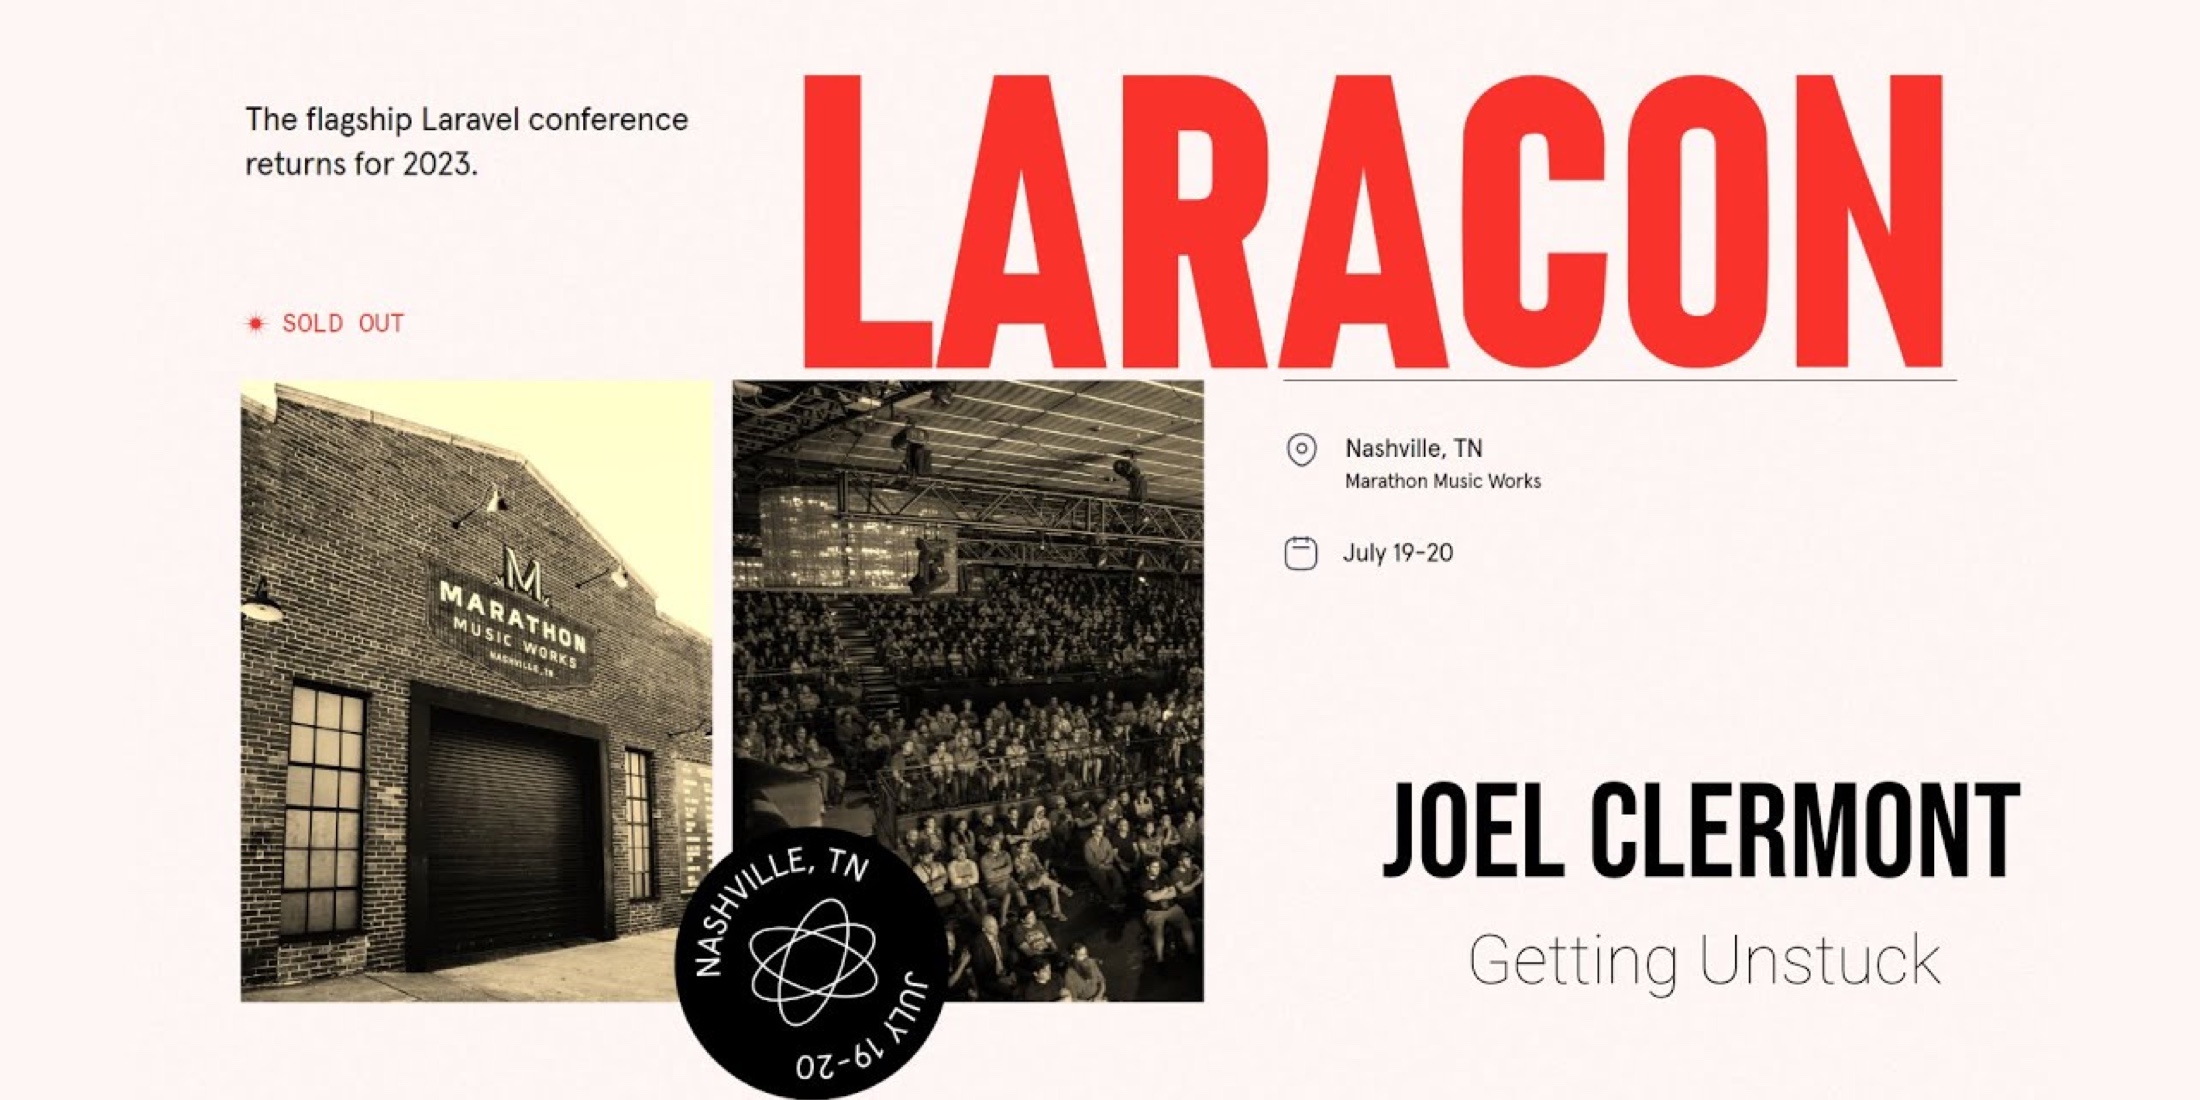 Watch Joel Clermont's "Getting Unstuck" talk from Laracon image